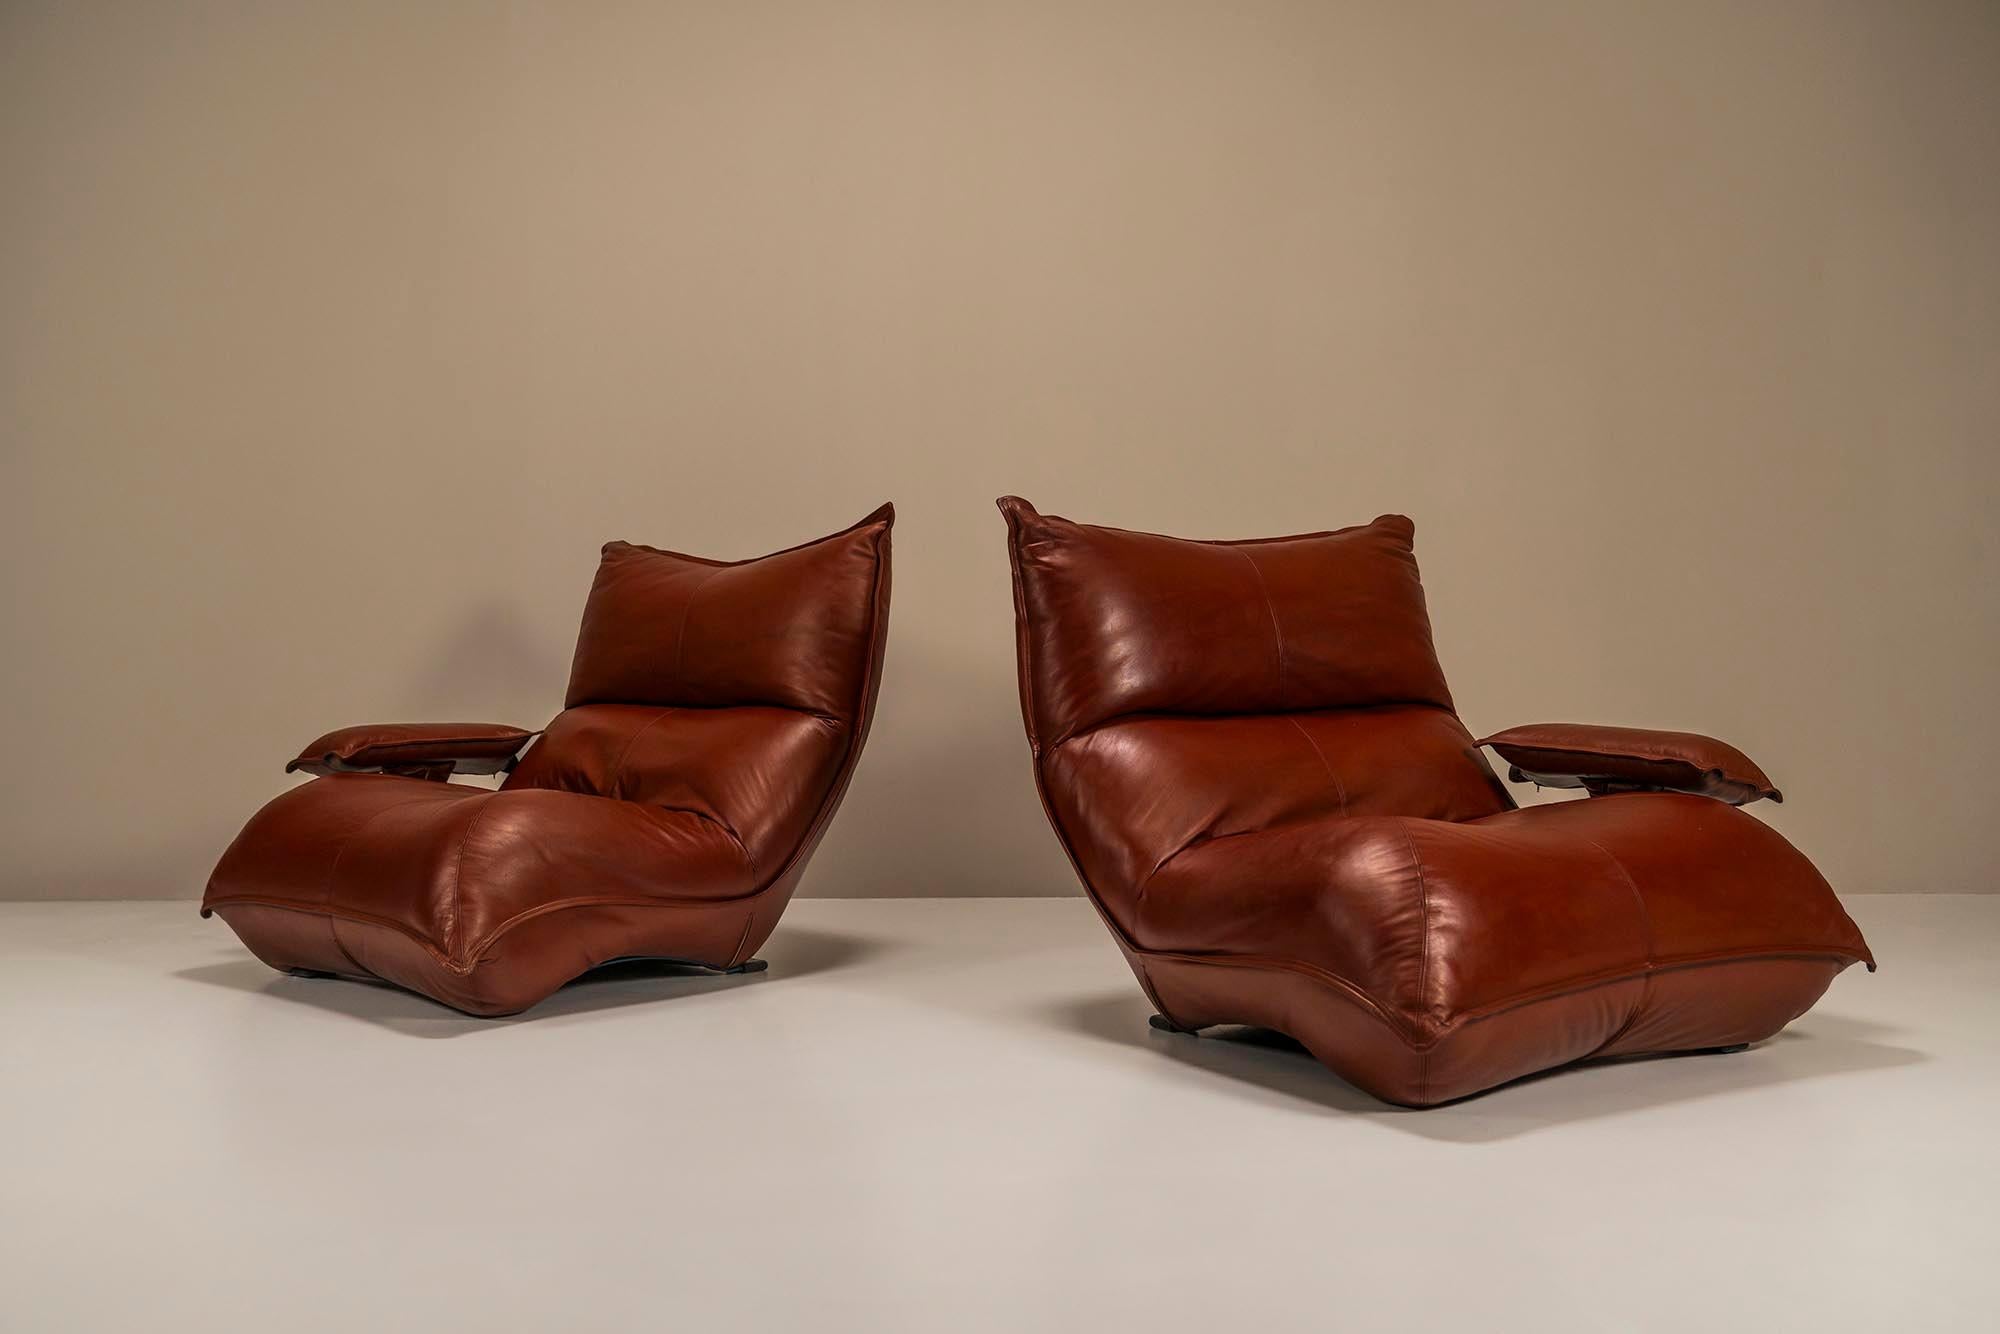 Lounge chairs model “Zinzolo” by Vittorio Varo for Plan.With the so-called “Zinzolo” project for Plan in the sixties, the Italian designer Vittorio Varo took a radically different direction from what people expected from a lounge chair. The design